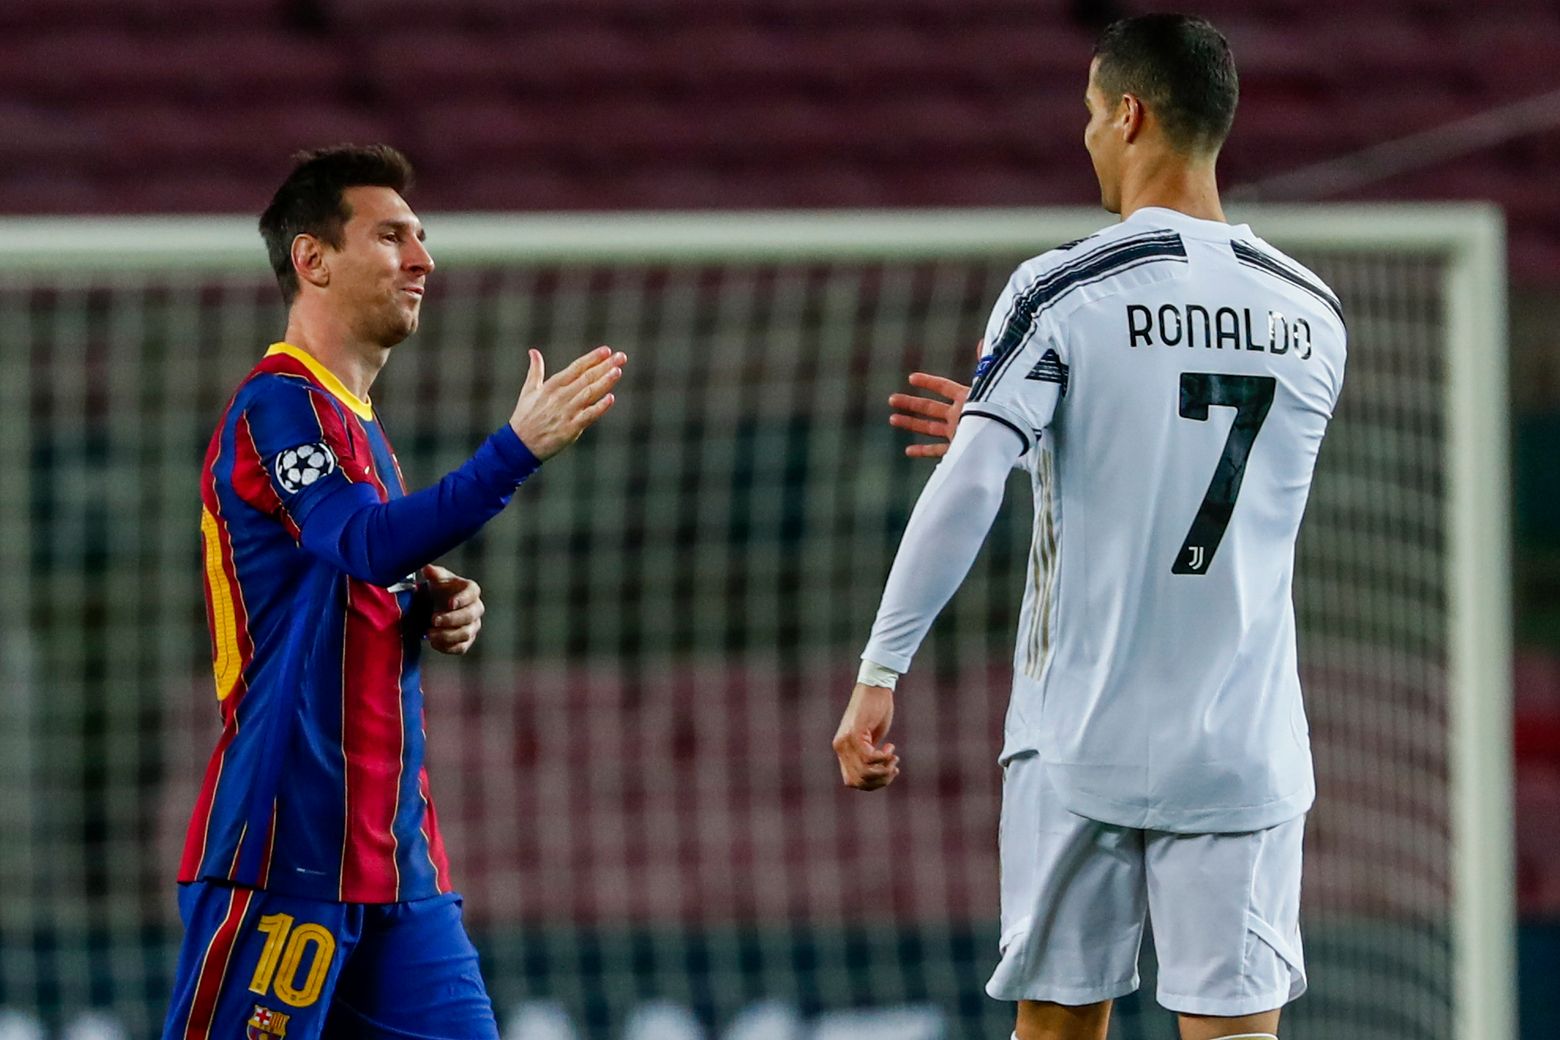 The 21 players to play alongside both Messi & Ronaldo - & what they said